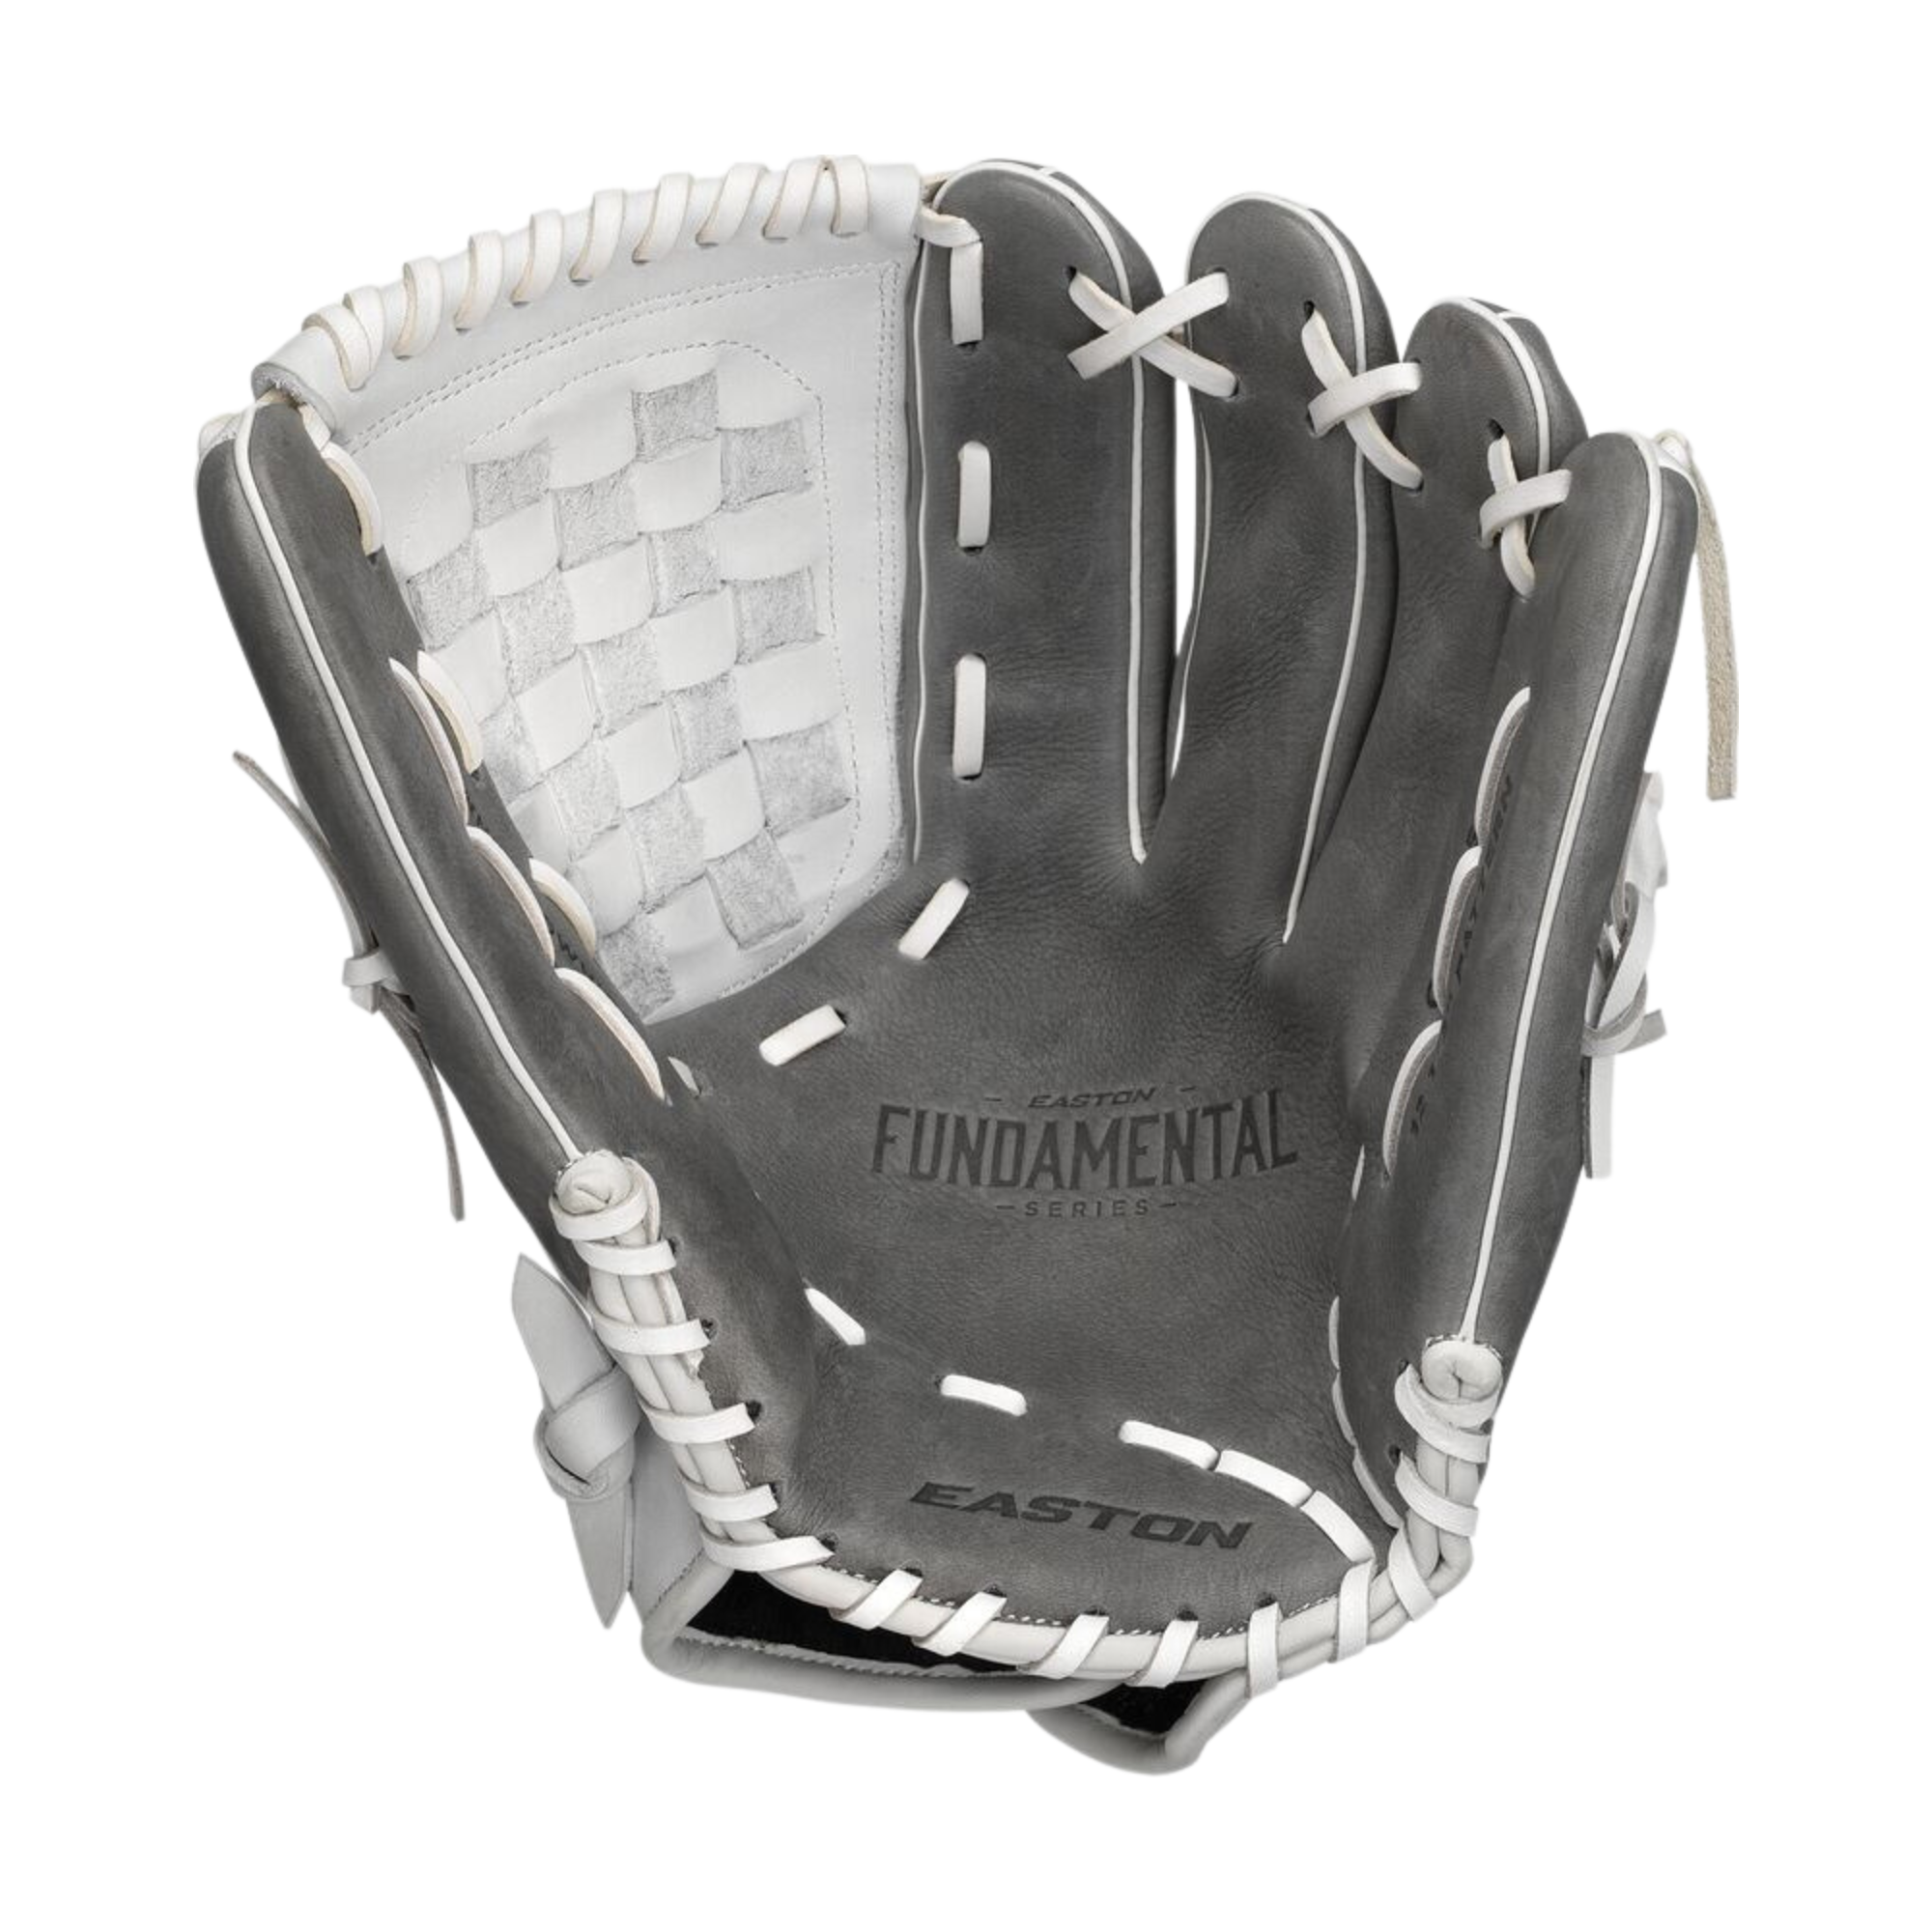 Easton FMFP125 Fundamental 12.5 in Fastpitch P/Out Pattern